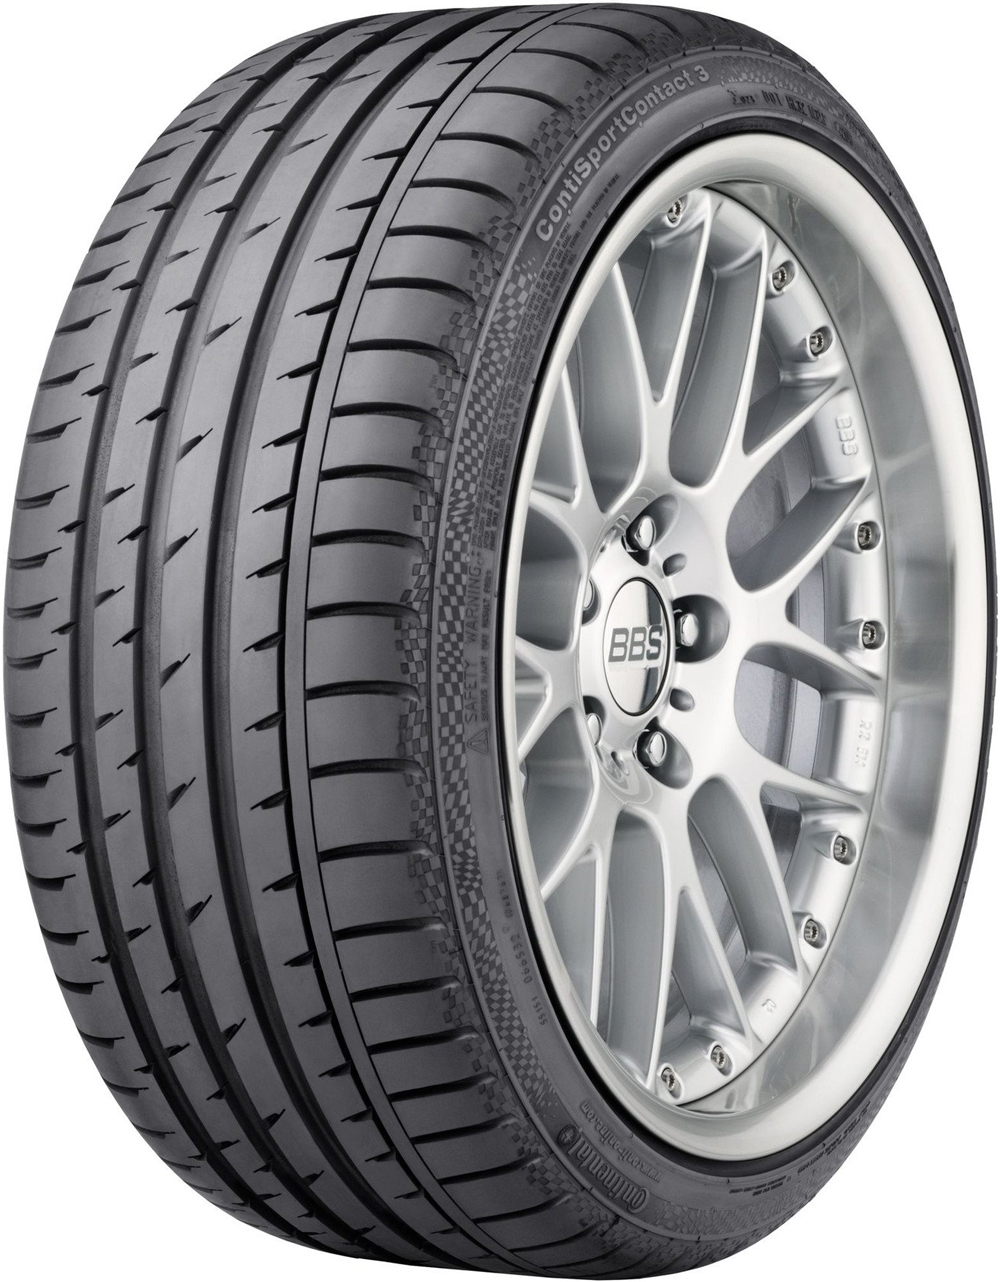 Гуми за кола CONTINENTAL Conti Sport Contact 3 RFT BMW 275/40 R18 99